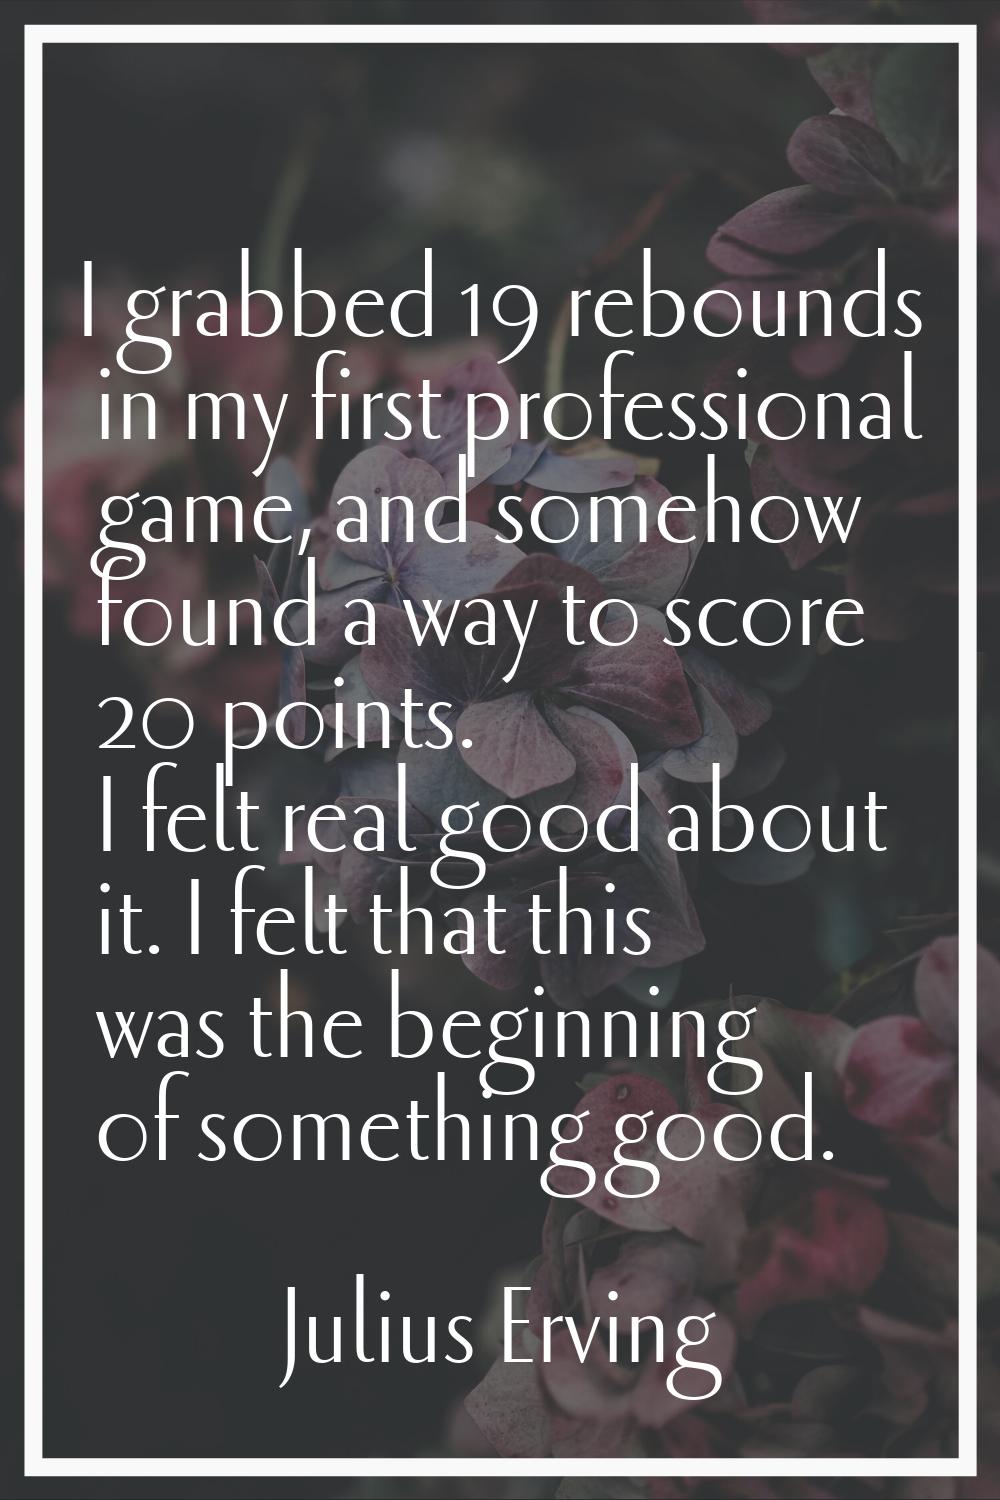 I grabbed 19 rebounds in my first professional game, and somehow found a way to score 20 points. I 